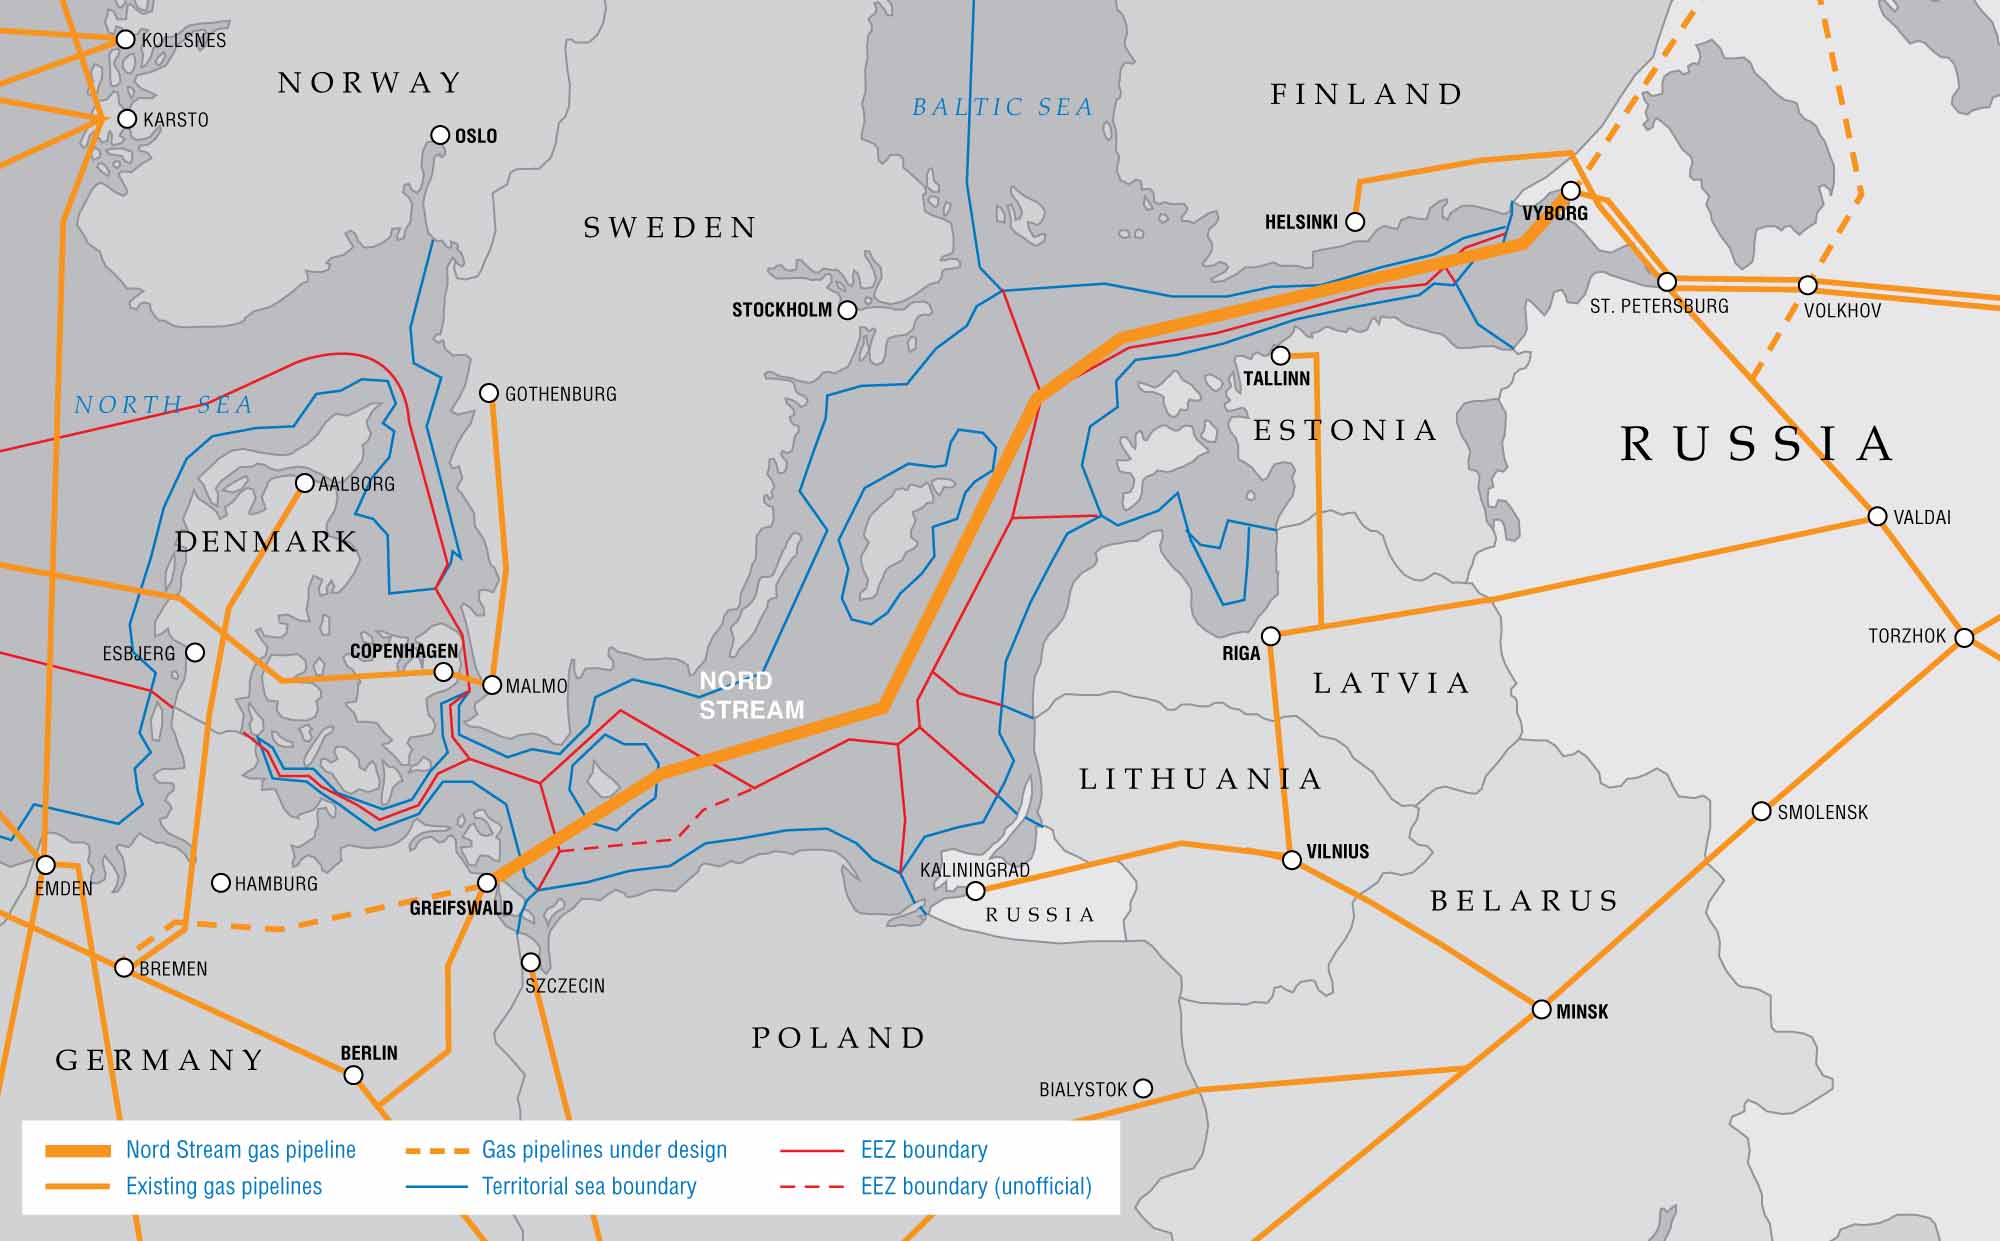 Image 5: Existing and and proposed gas pipelines between Russia and Europe - Source : Gazprom